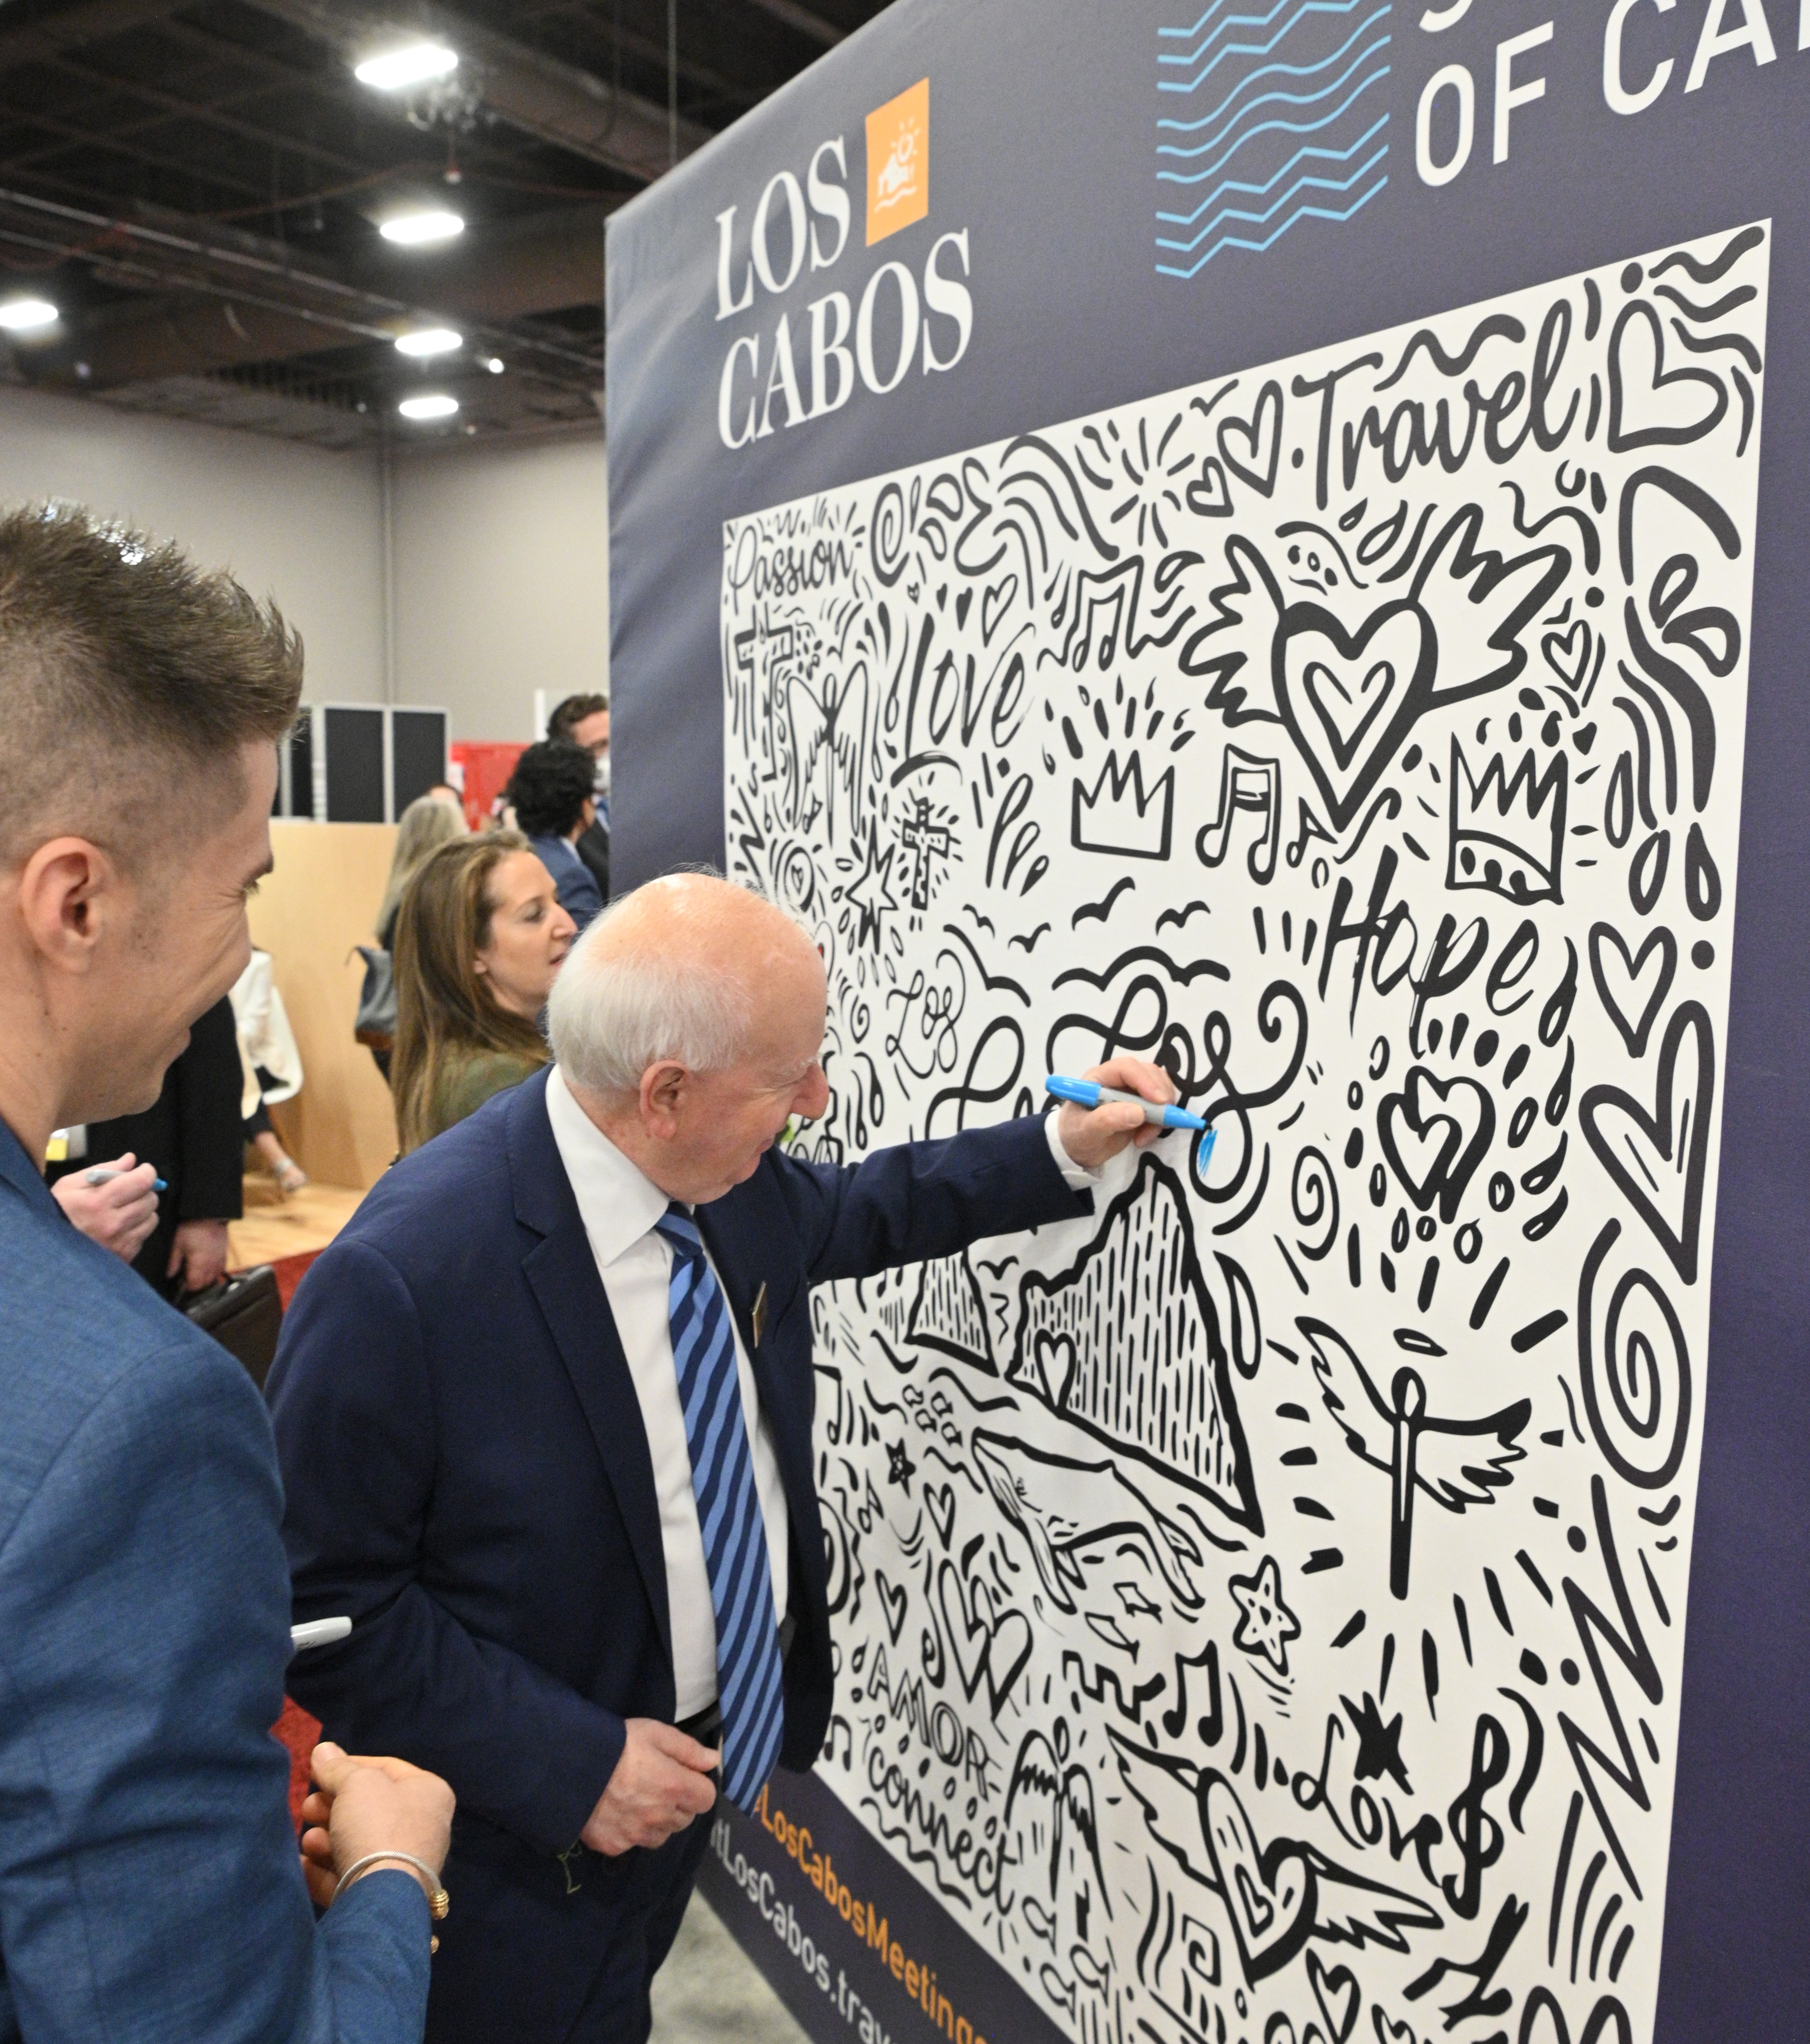 IMEX's Ray Bloom and Carina Bauer fill in the Los Cabos coloring wall